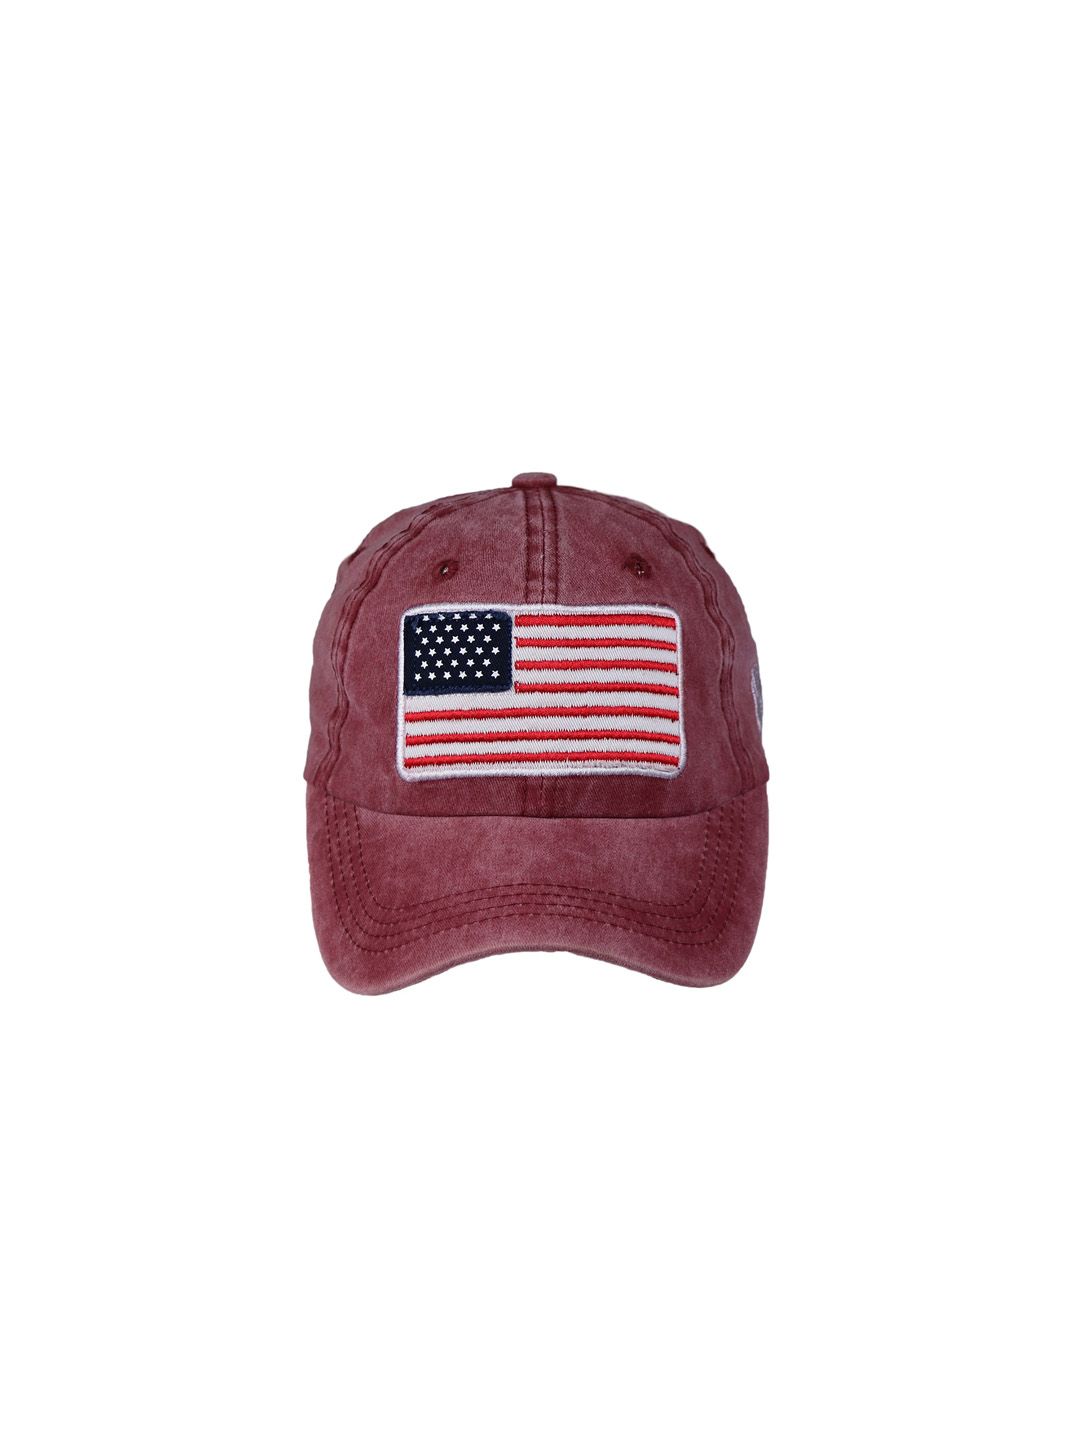 iSWEVEN Unisex Red Printed Snapback Cap Price in India